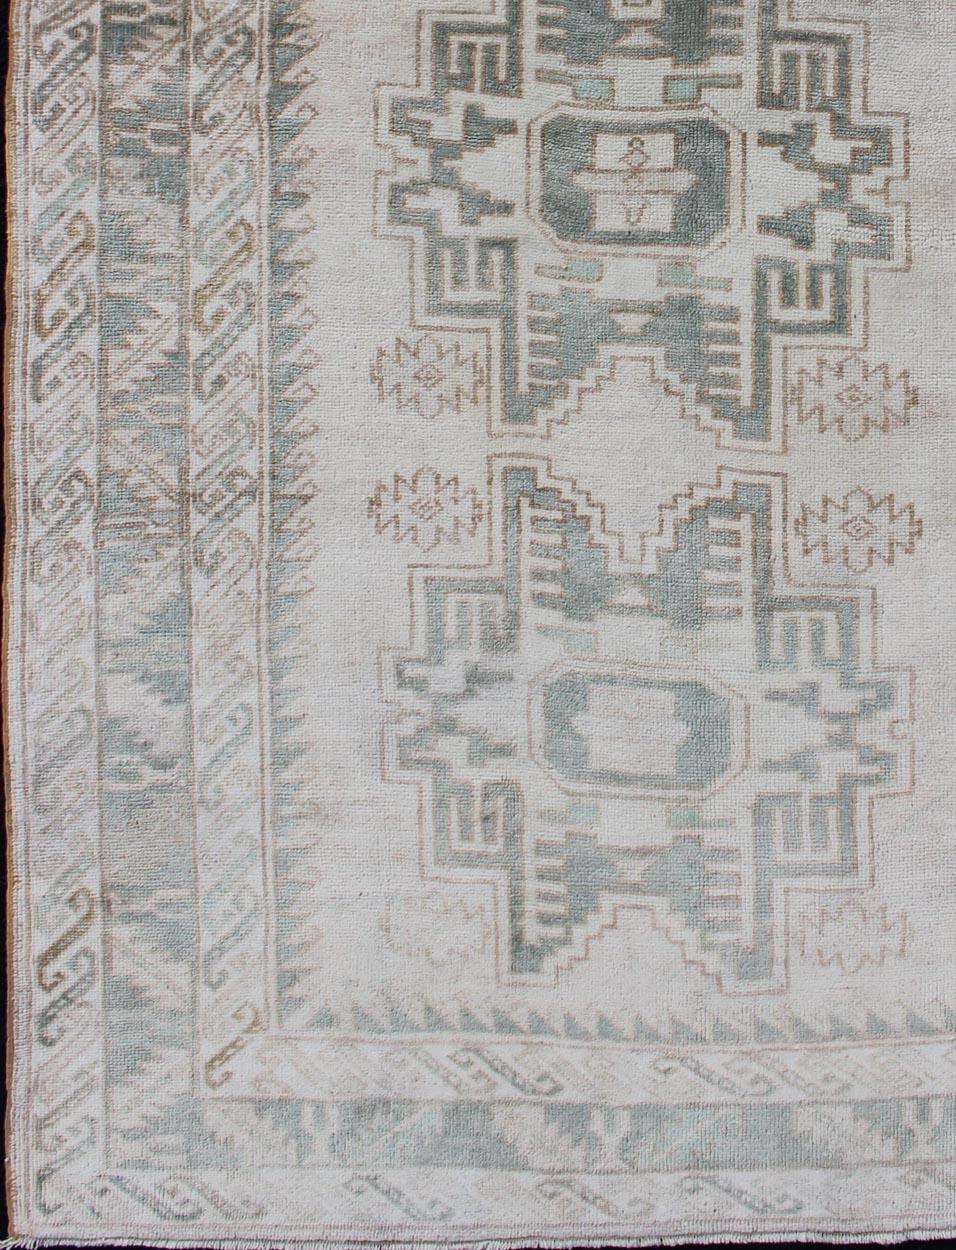 Vintage Oushak rug with central medallions light green, Keivan Woven Arts / Rug TU-MTU-106, country of origin / type: Turkey / Oushak, circa mid-20th century.

This vintage Turkish Oushak rug (circa mid-20th century) features a unique blend of